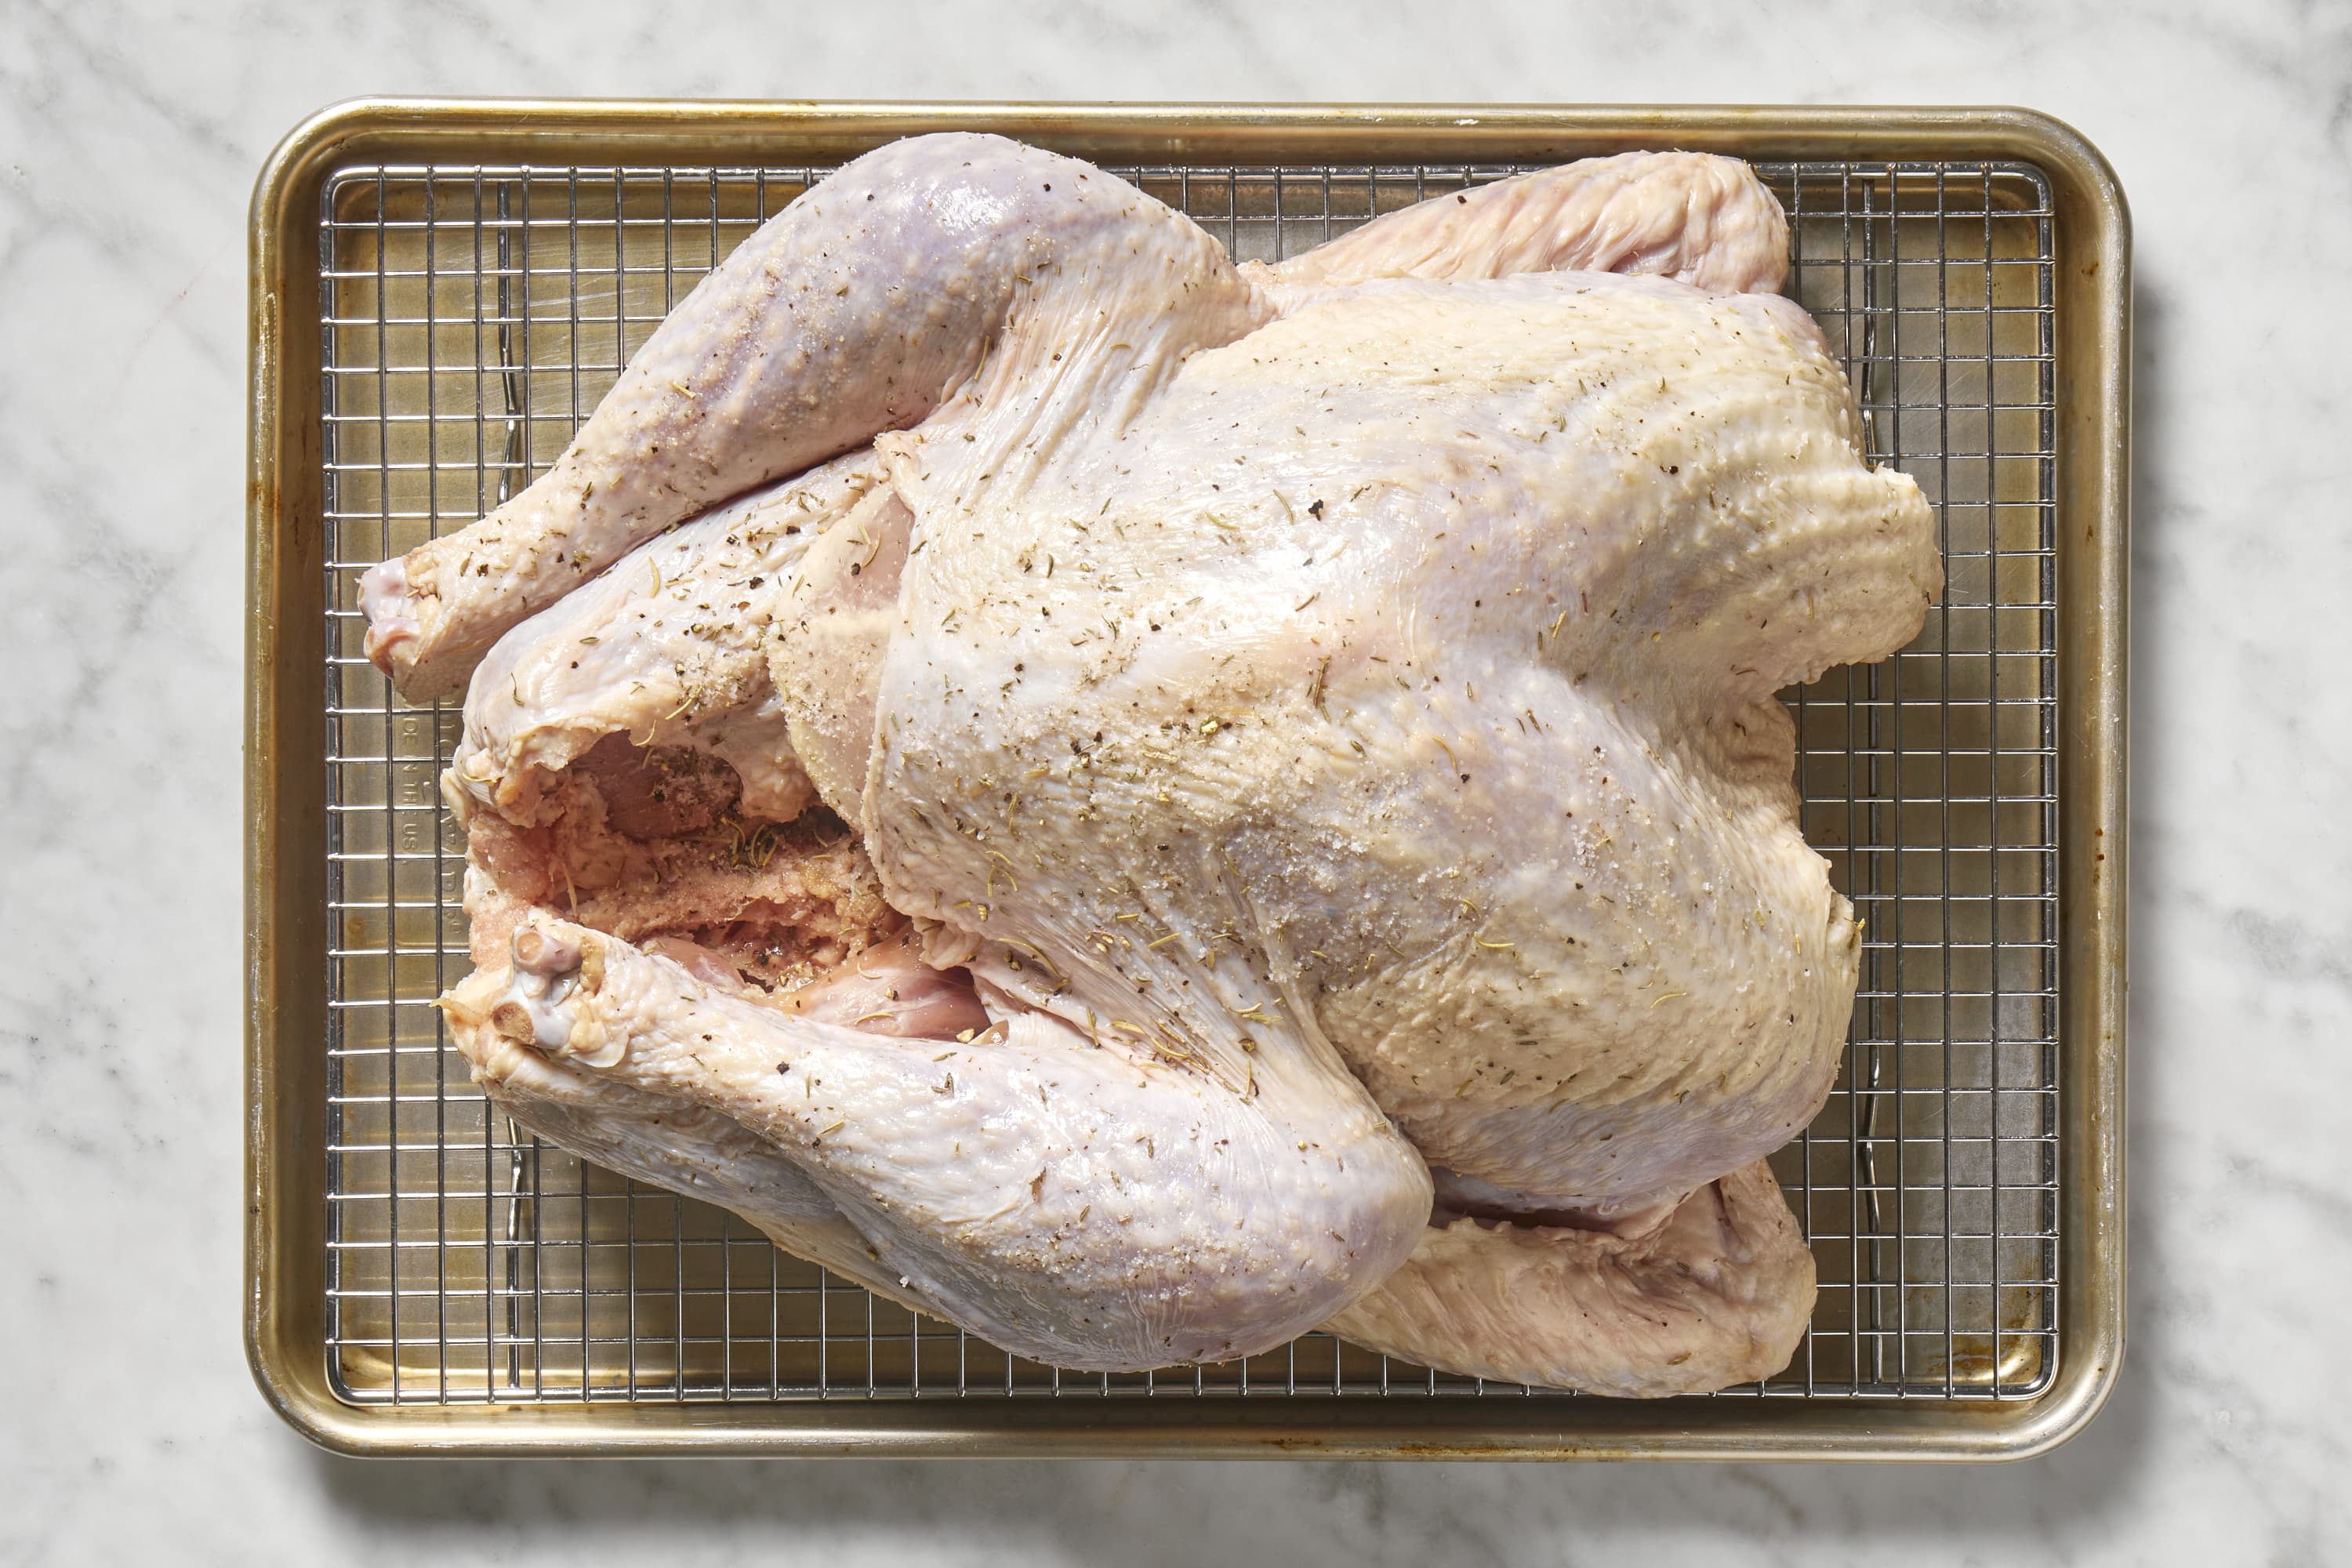 https://cdn.apartmenttherapy.info/image/upload/v1695677061/k/Photo/Recipes/2023-09-how-to-dry-brine-a-turkey/how-to-dry-brine-a-turkey-376.jpg